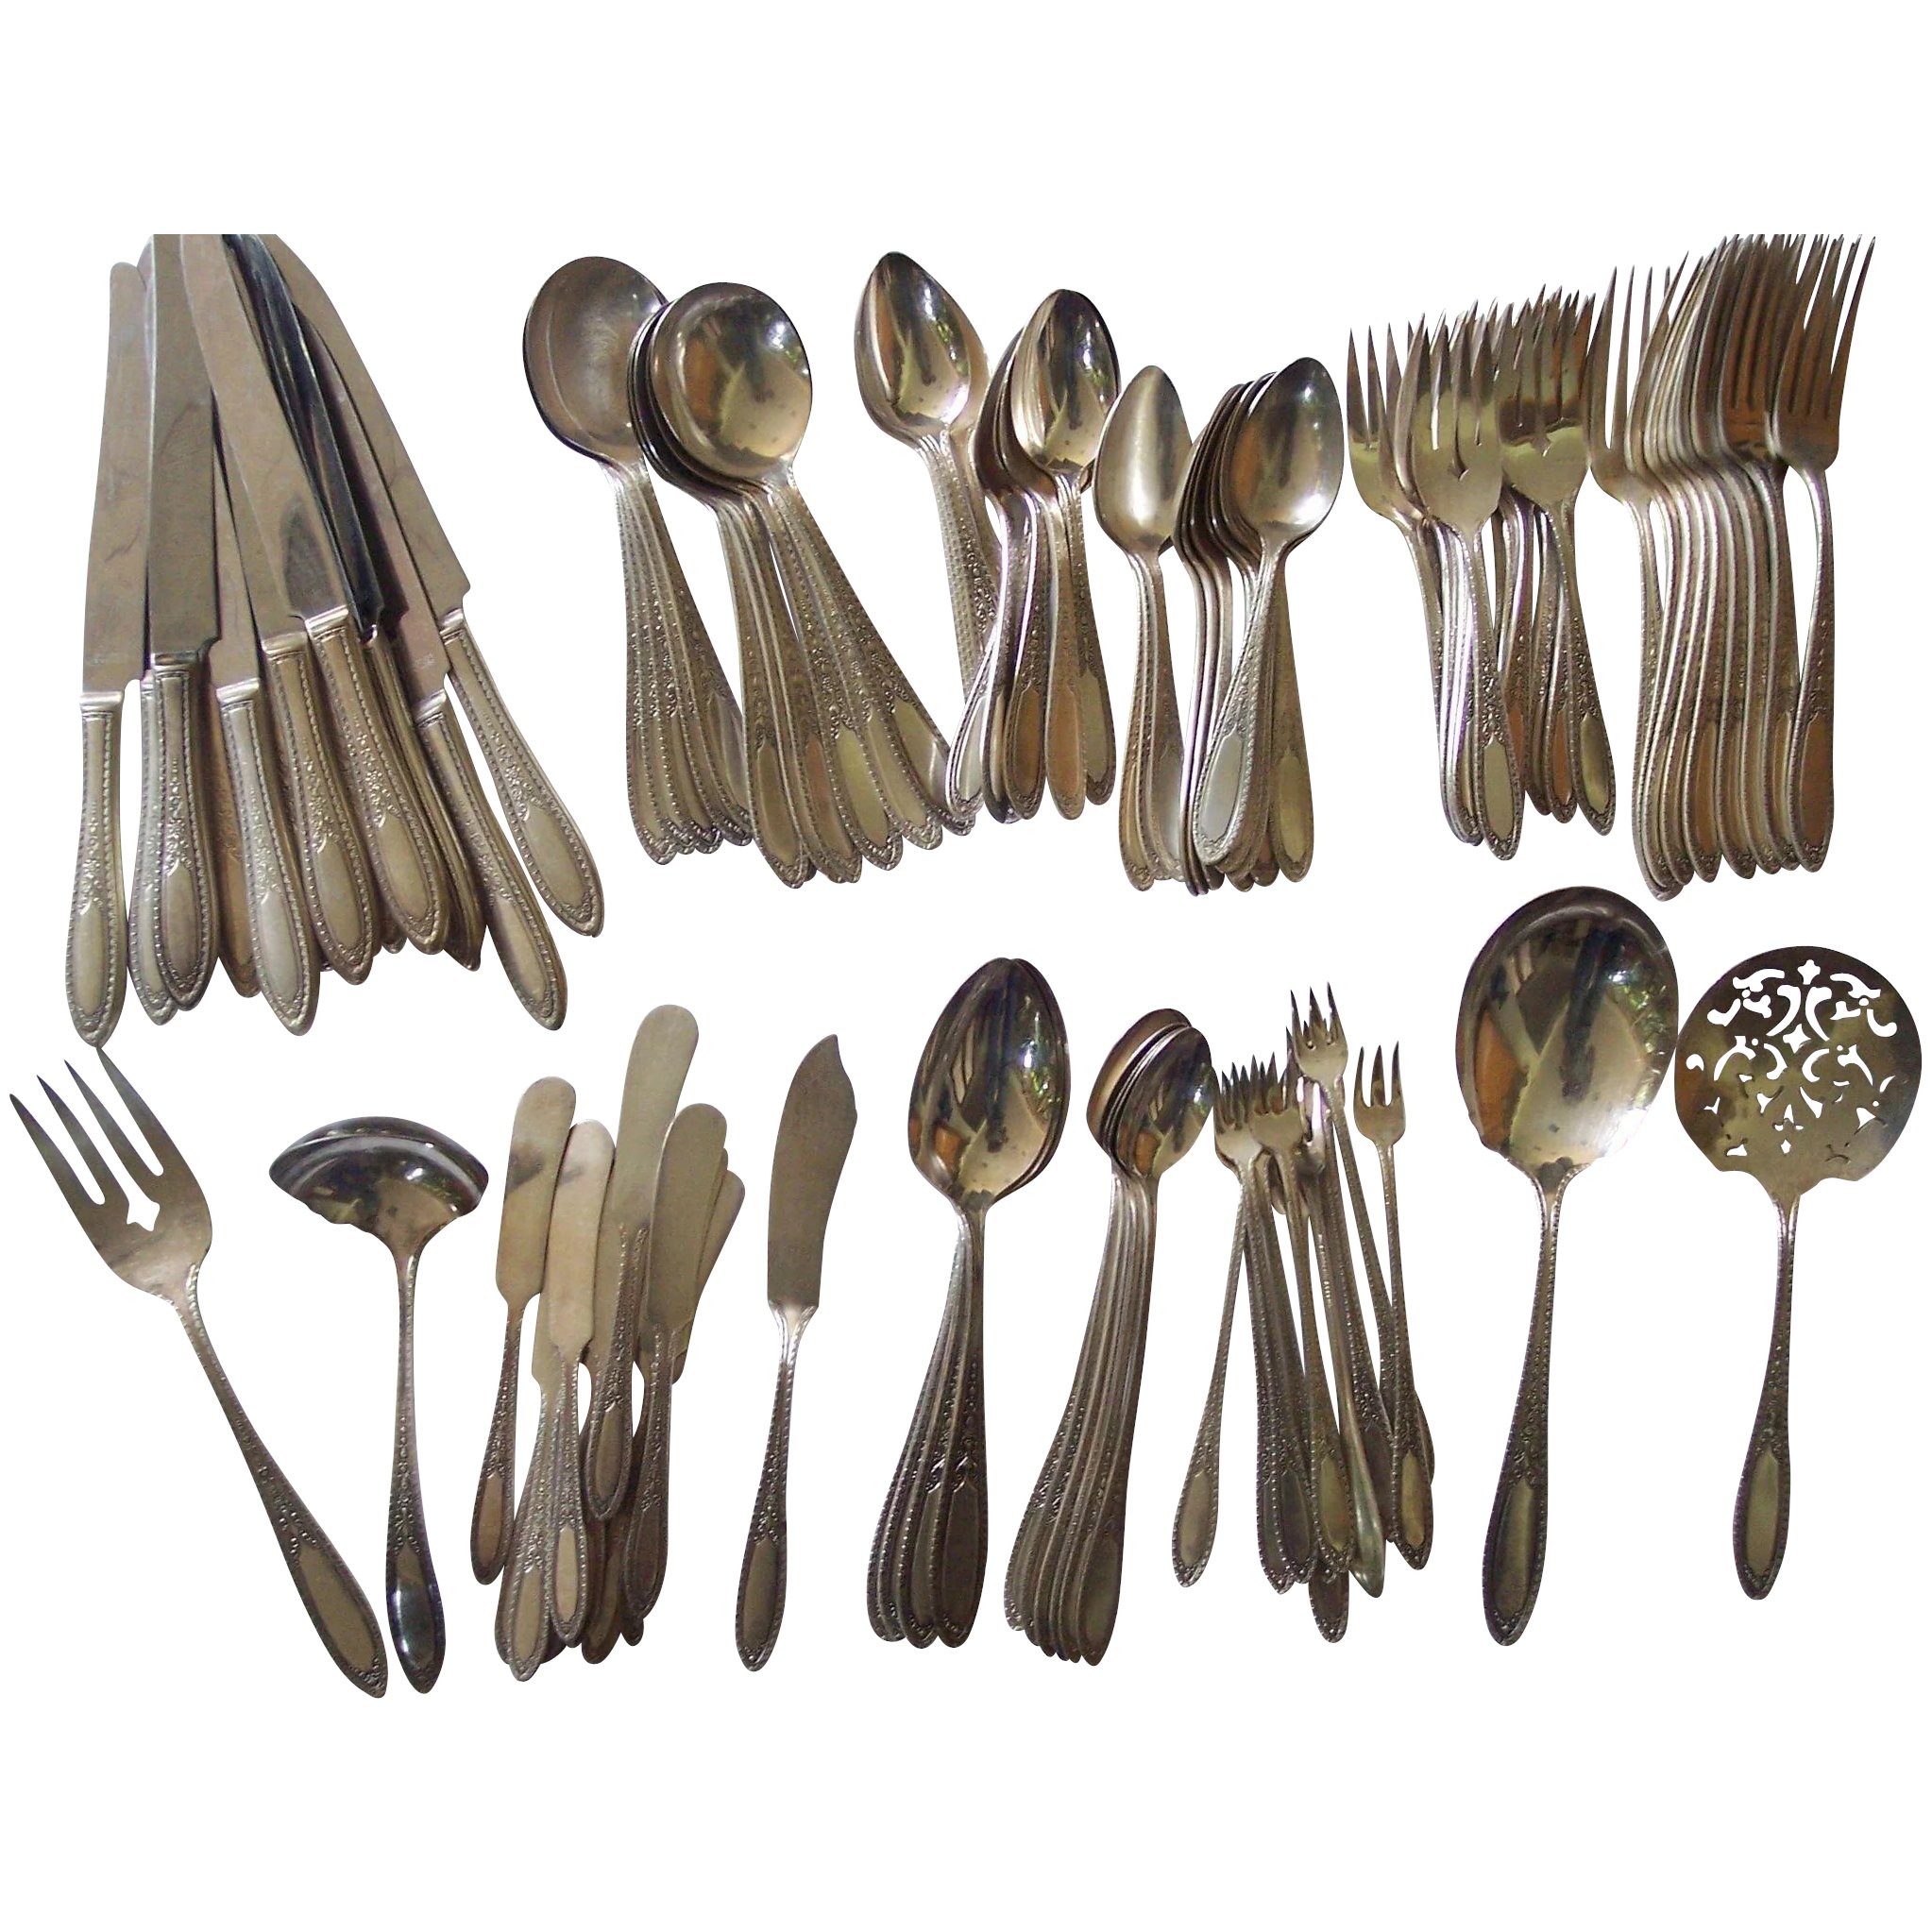 1891-rogers-silverware-vlr-eng-br